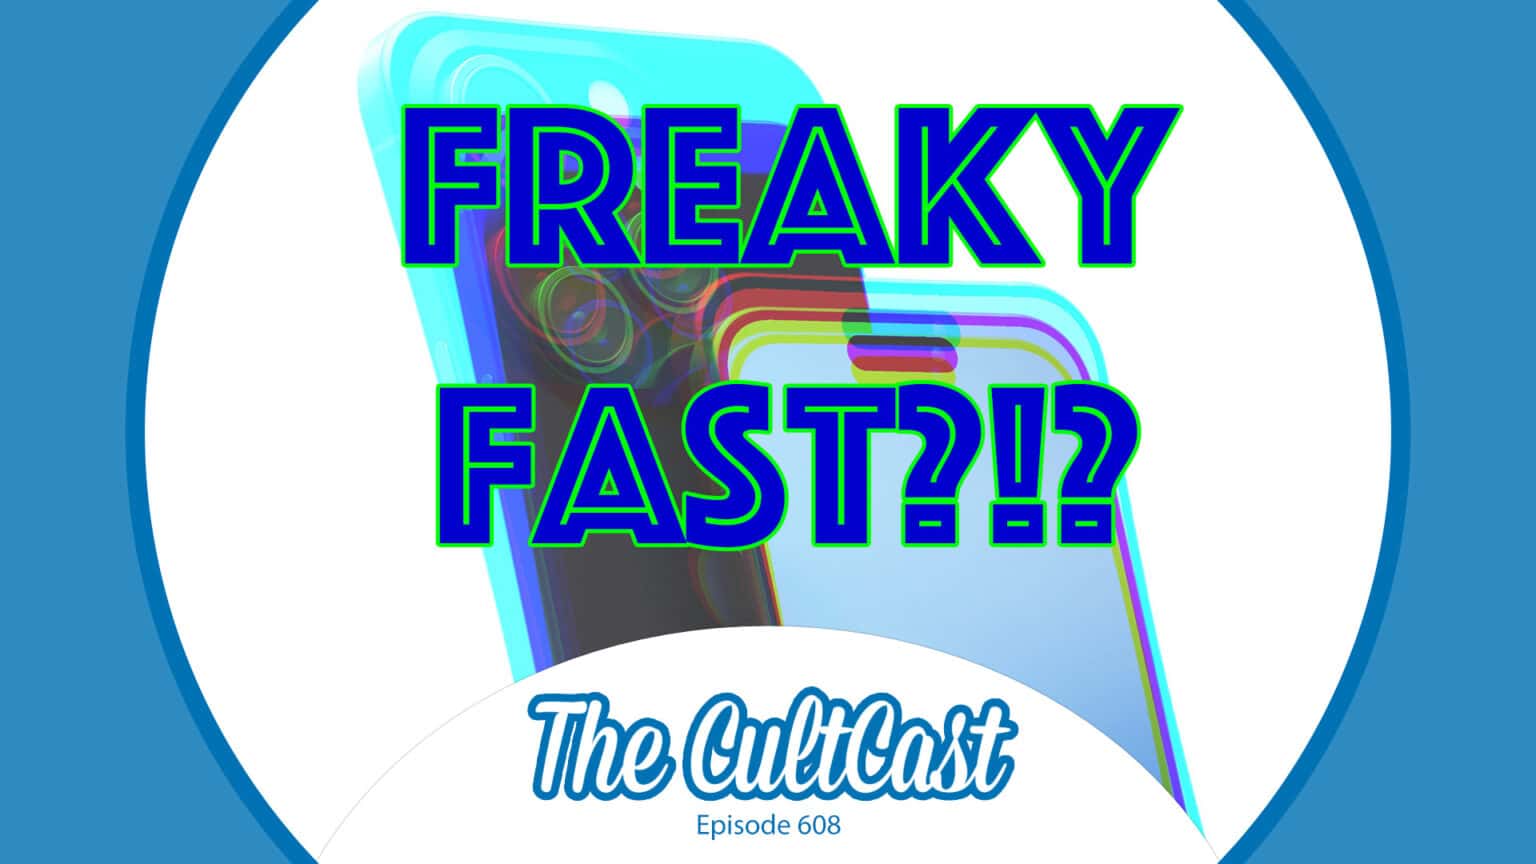 The CultCast episode 608: iPhone 15 - Freaky Fast?!?